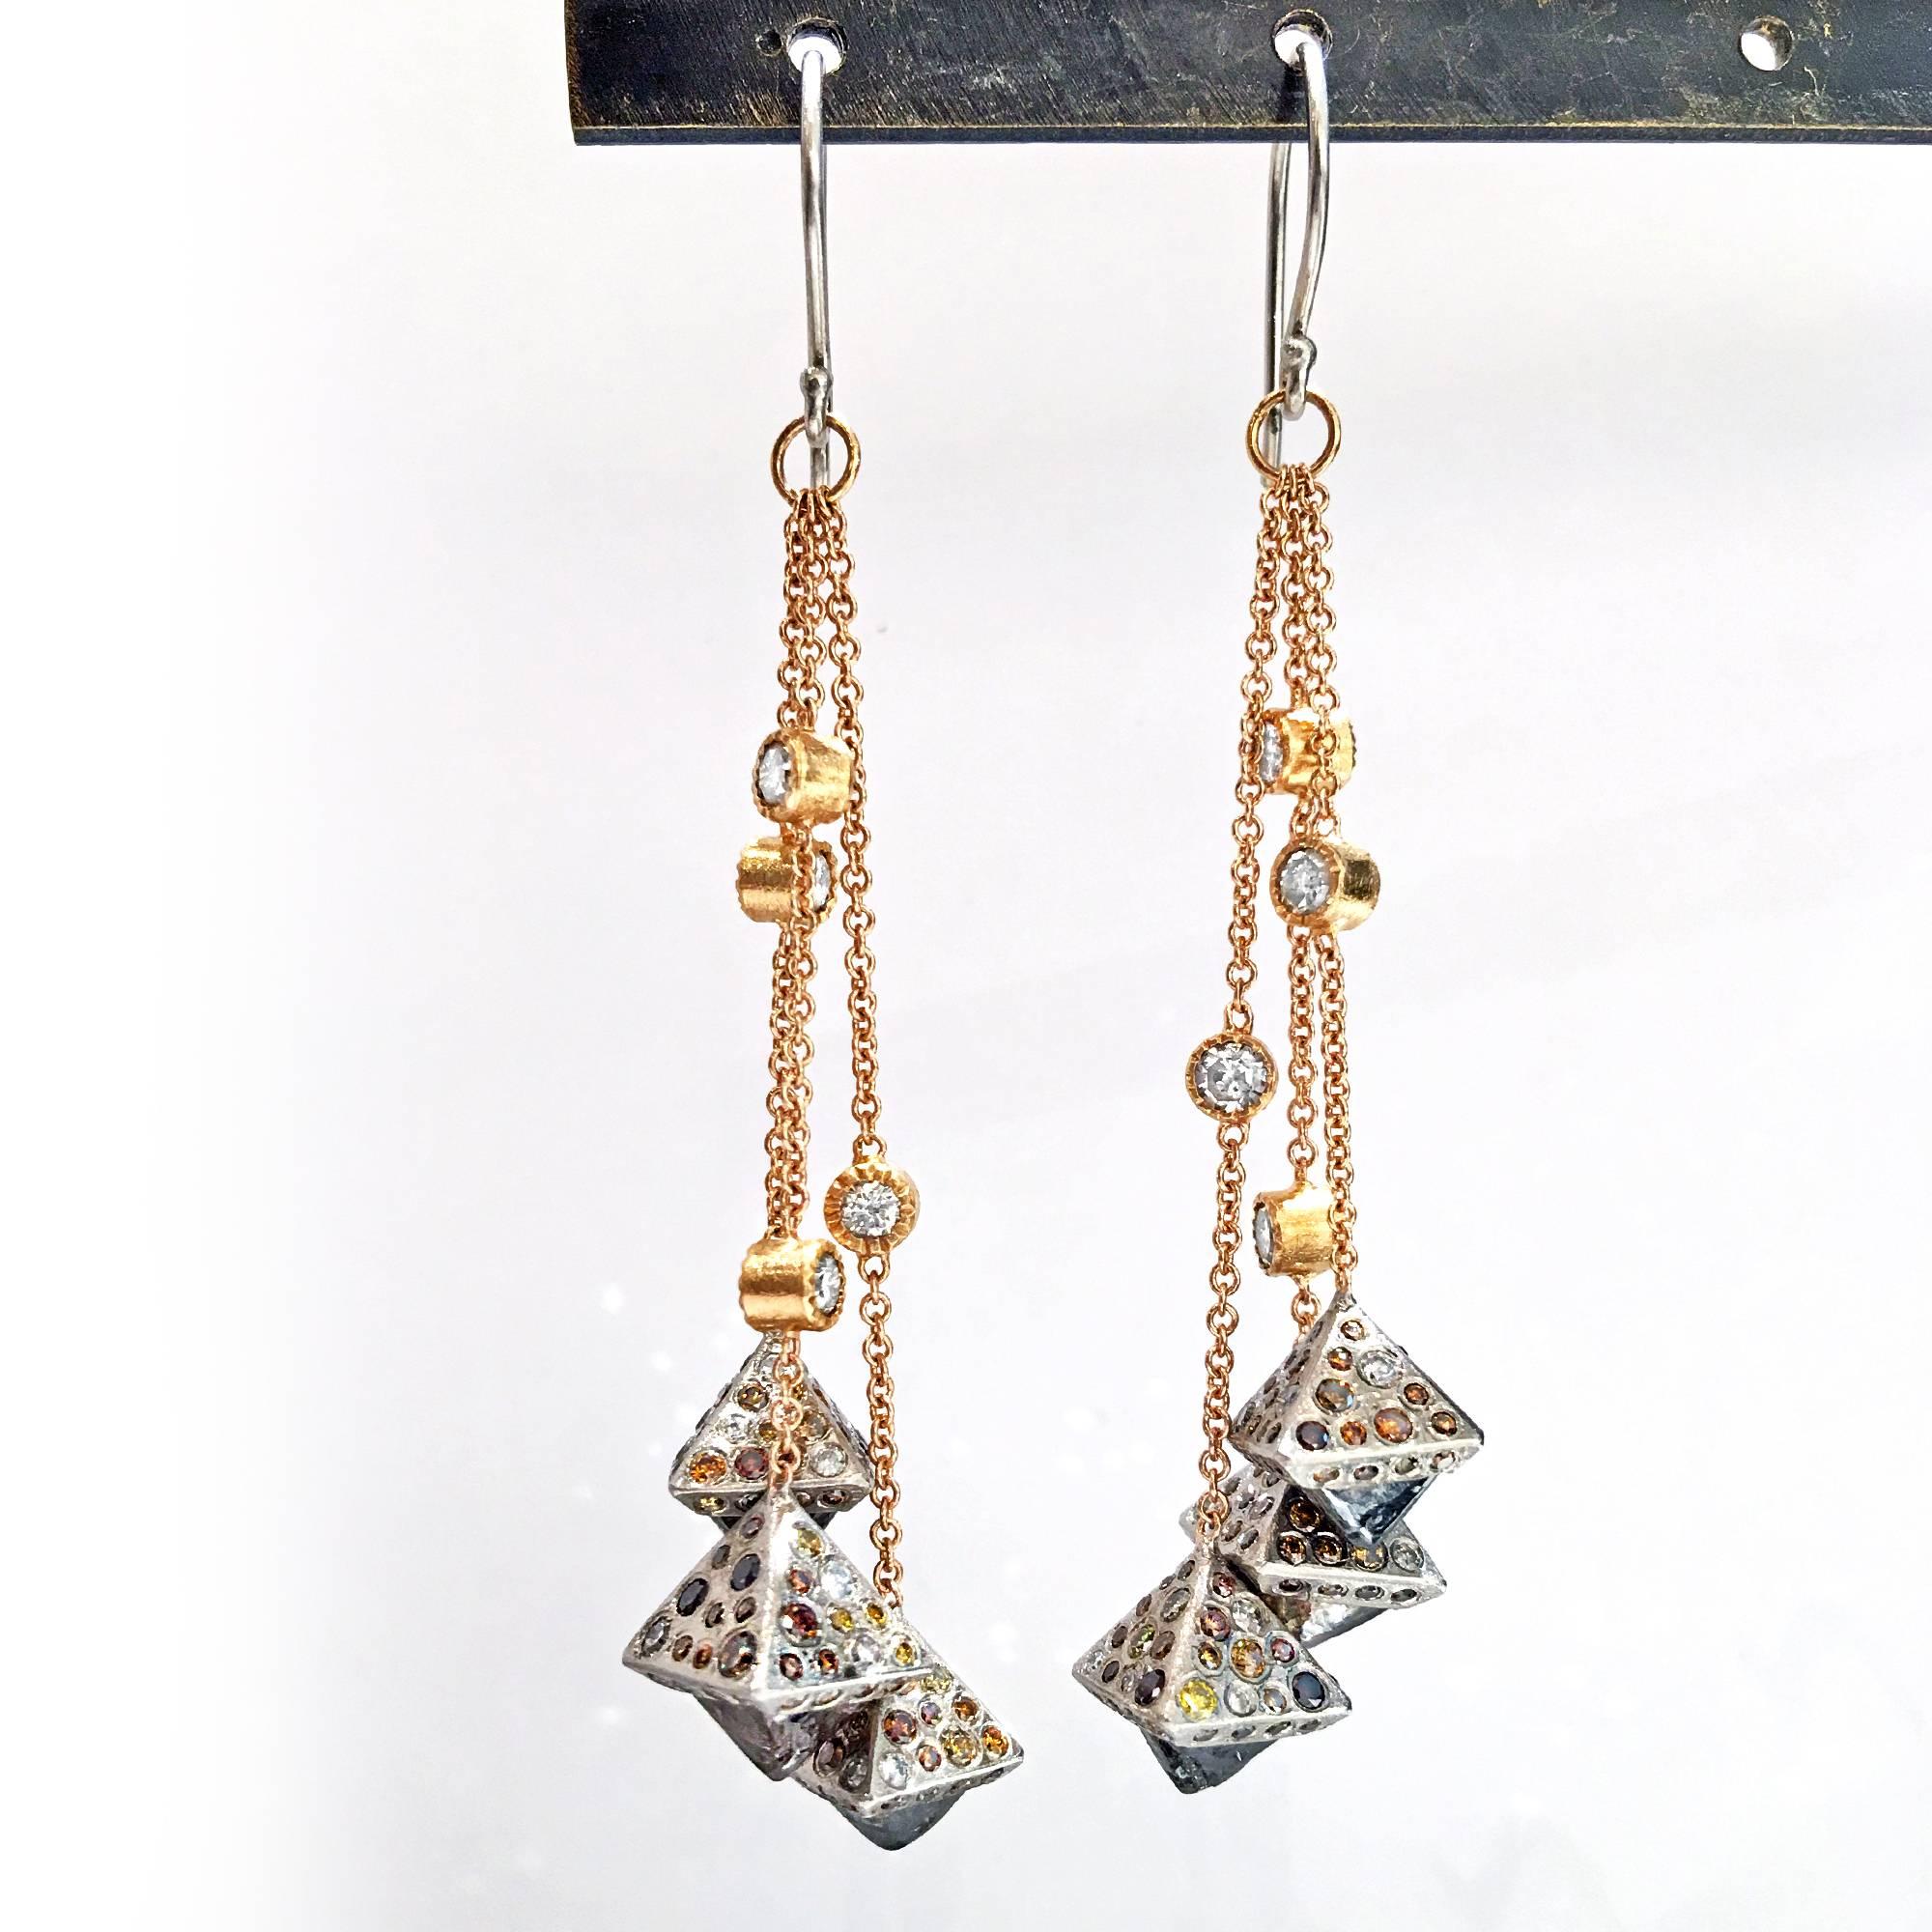 One of a Kind Dangle Drop Earrings by acclaimed master jewelry artist Todd Reed handcrafted in a combination of beautifully textured palladium and 18k rose gold featuring six signature diamond octahedrons totaling 7.73 carats set beneath 2.31 carats